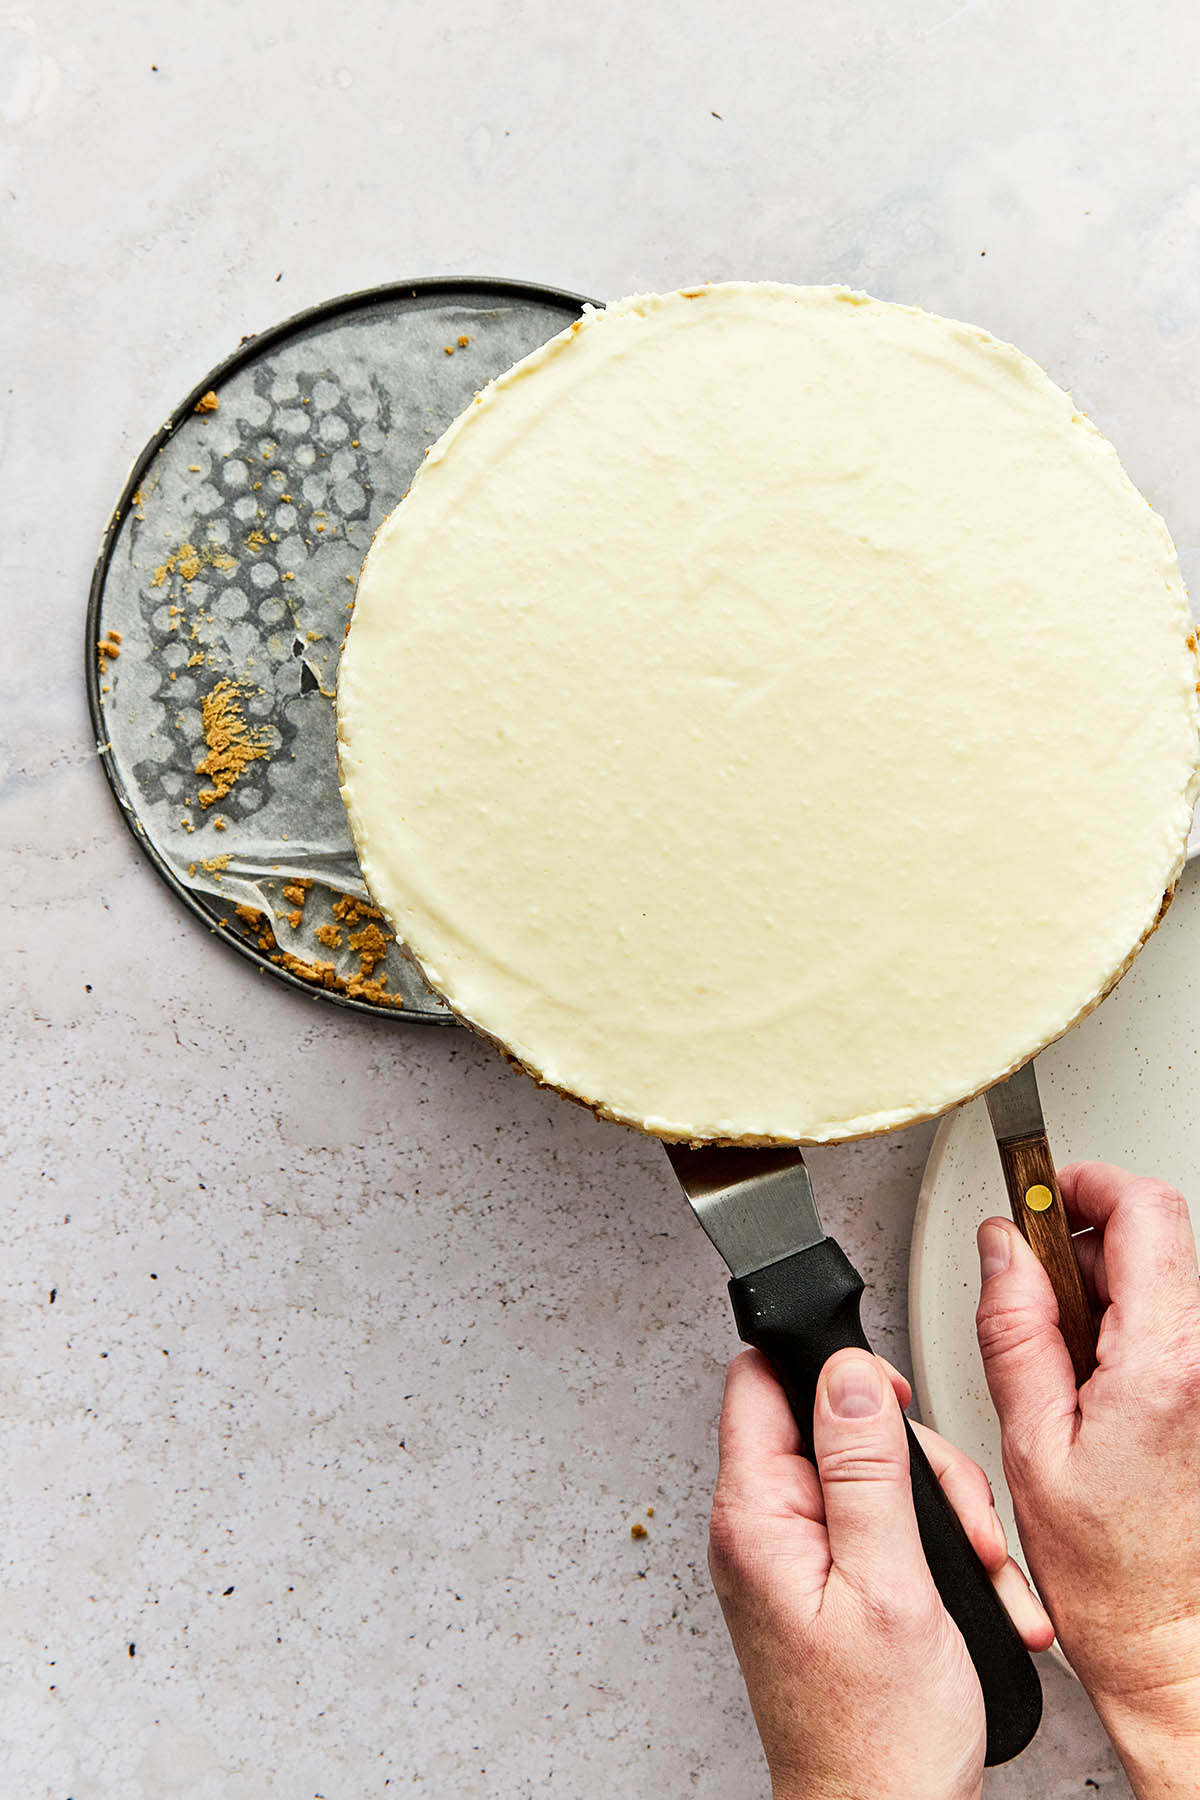 Hands using two cake spatulas to lift a whole cheesecake from the bottom of a springform pan.